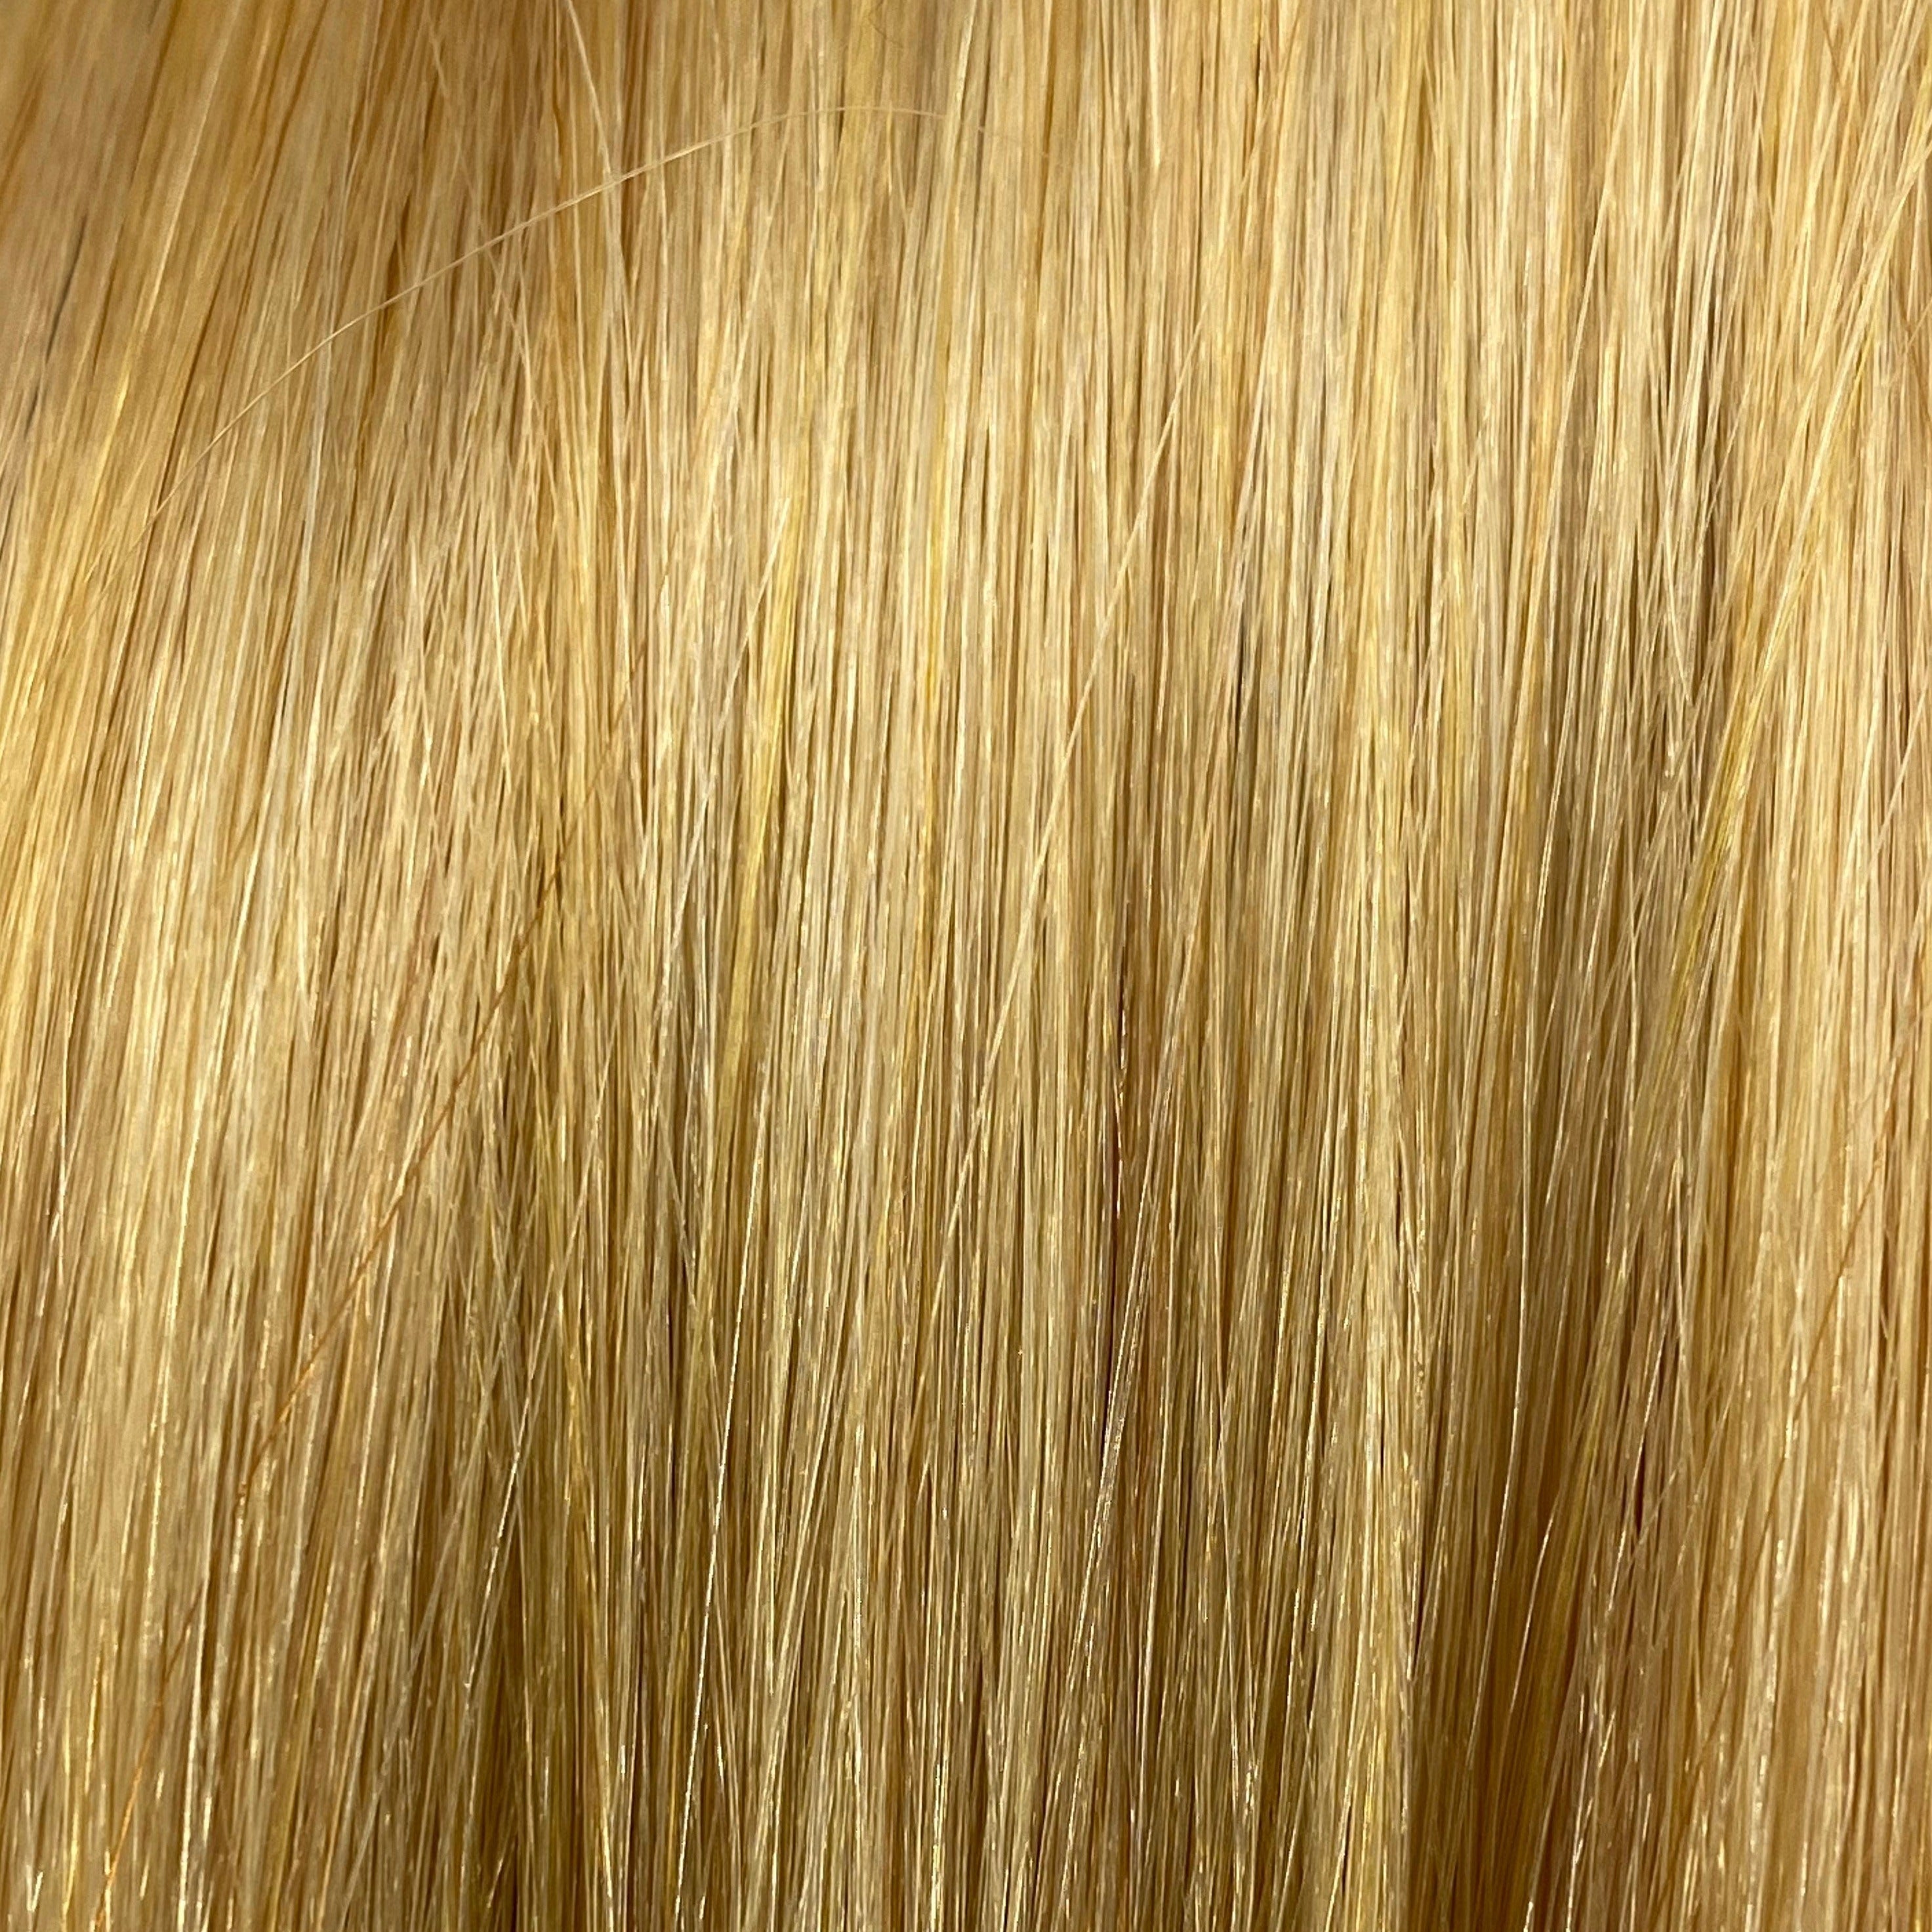 FUSION #20 VERY LIGHT ULTRA BLONDE 40CM/ 16 INCHES  -  17.5 GRAMS - Image 1